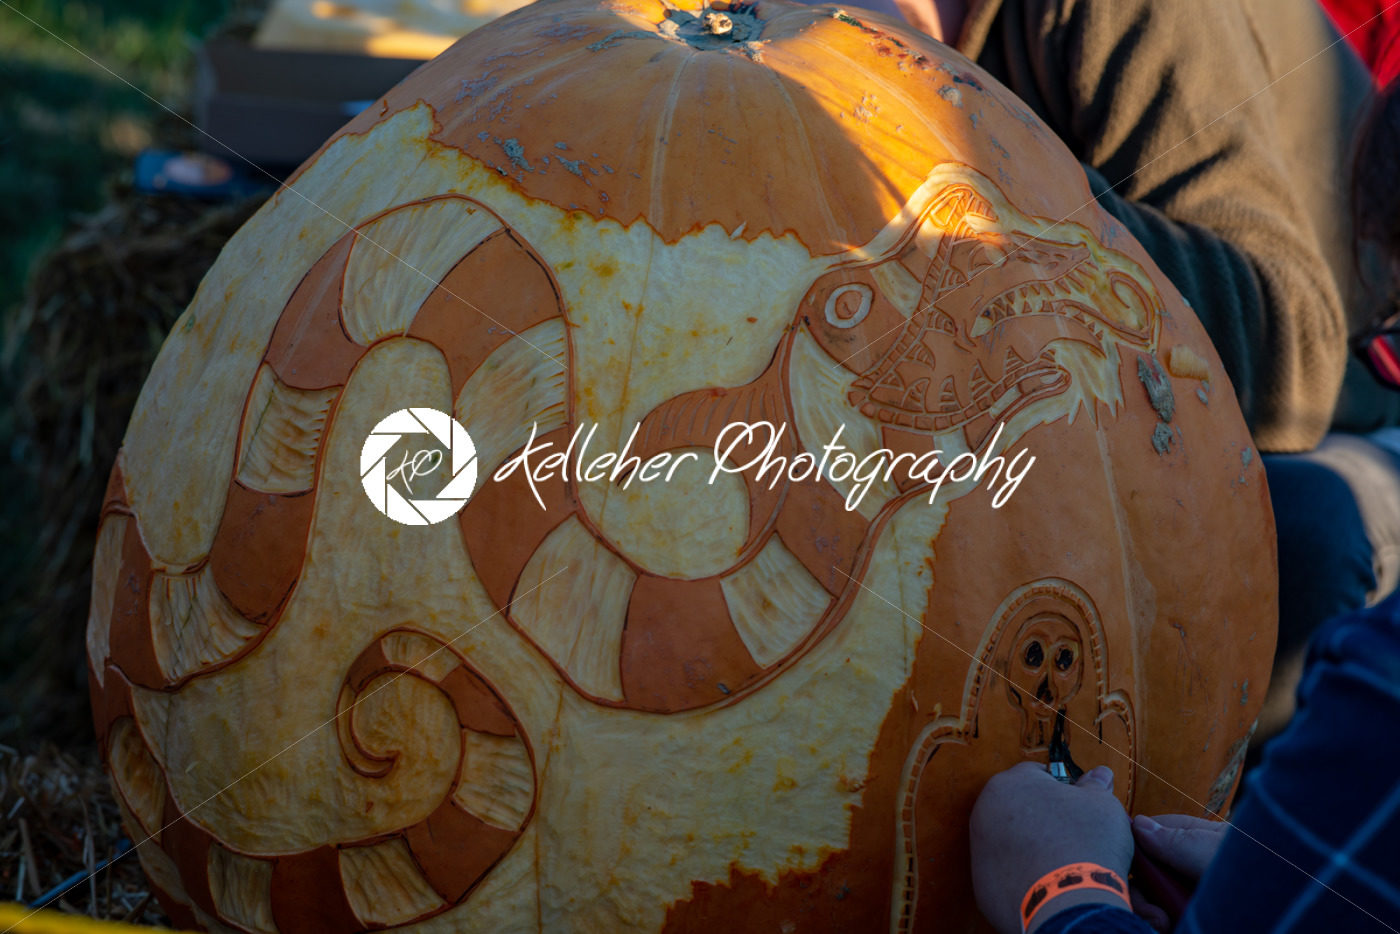 CHADDS FORD, PA – OCTOBER 18: Dragon and Bettlejuice Betelgeuse The Great Pumpkin Carve carving contest on October 18, 2018 - Kelleher Photography Store